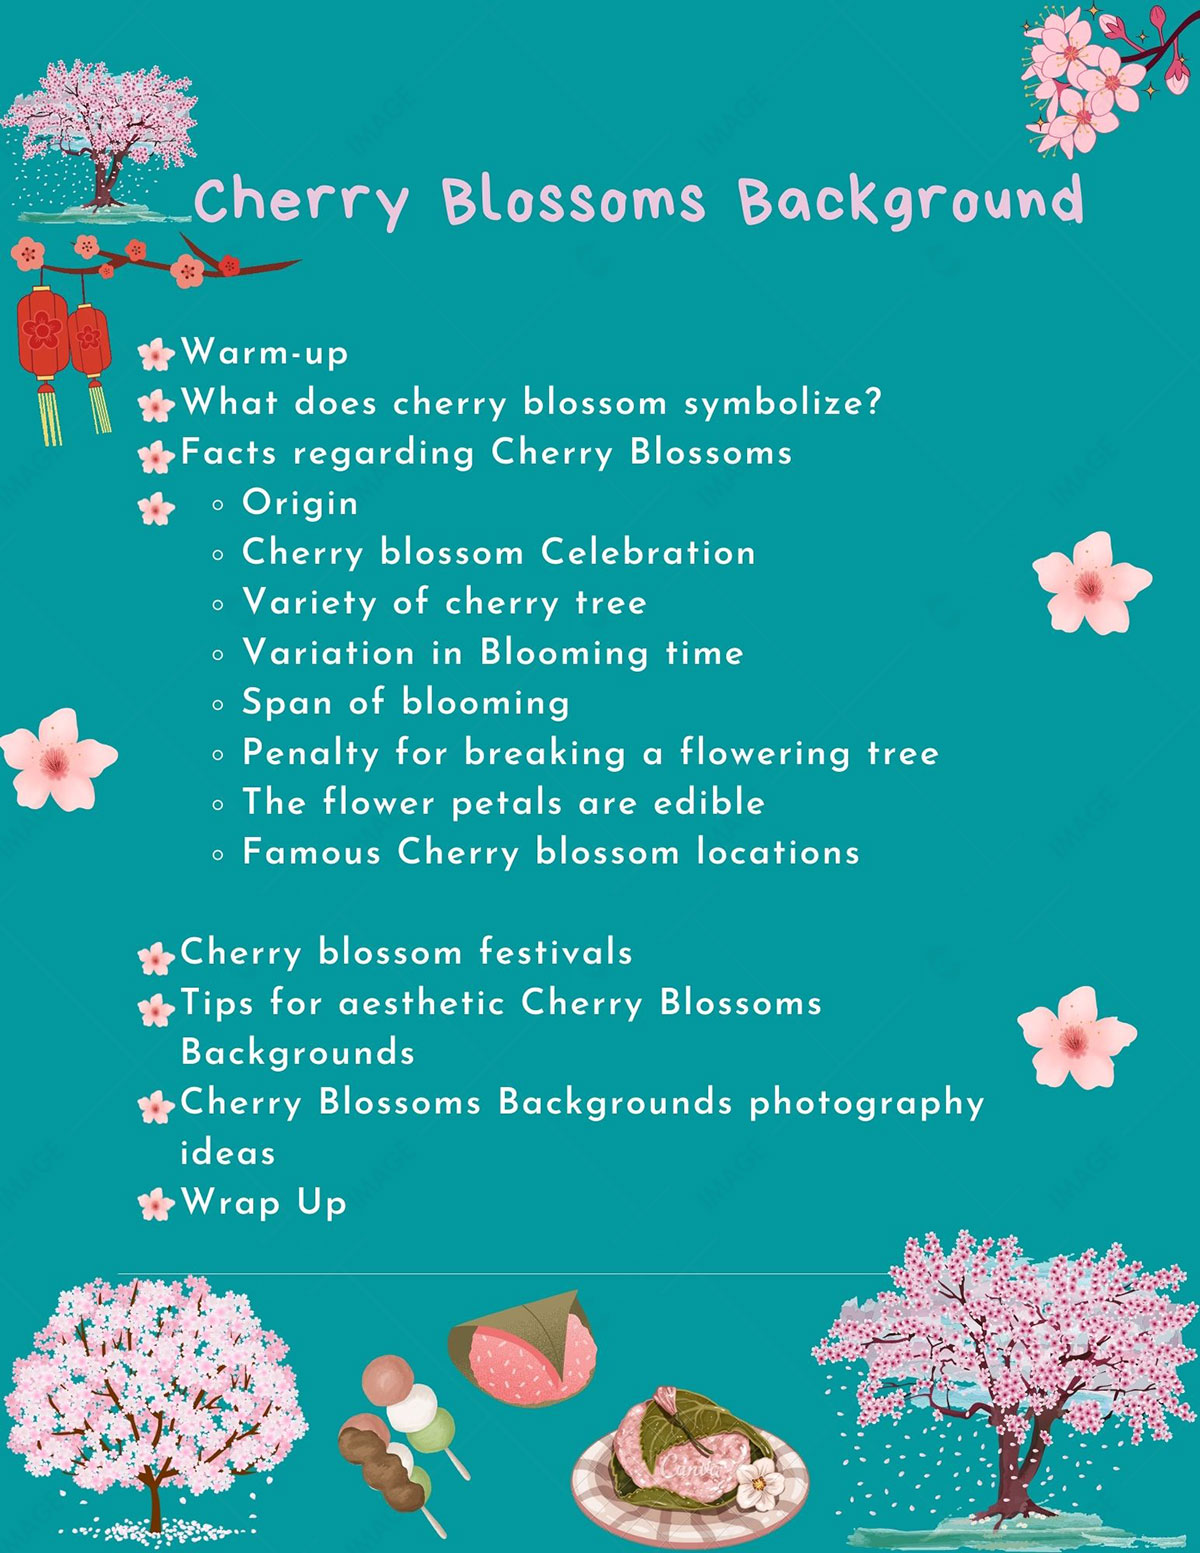 Tips for Capturing Cherry Blossoms Backgrounds